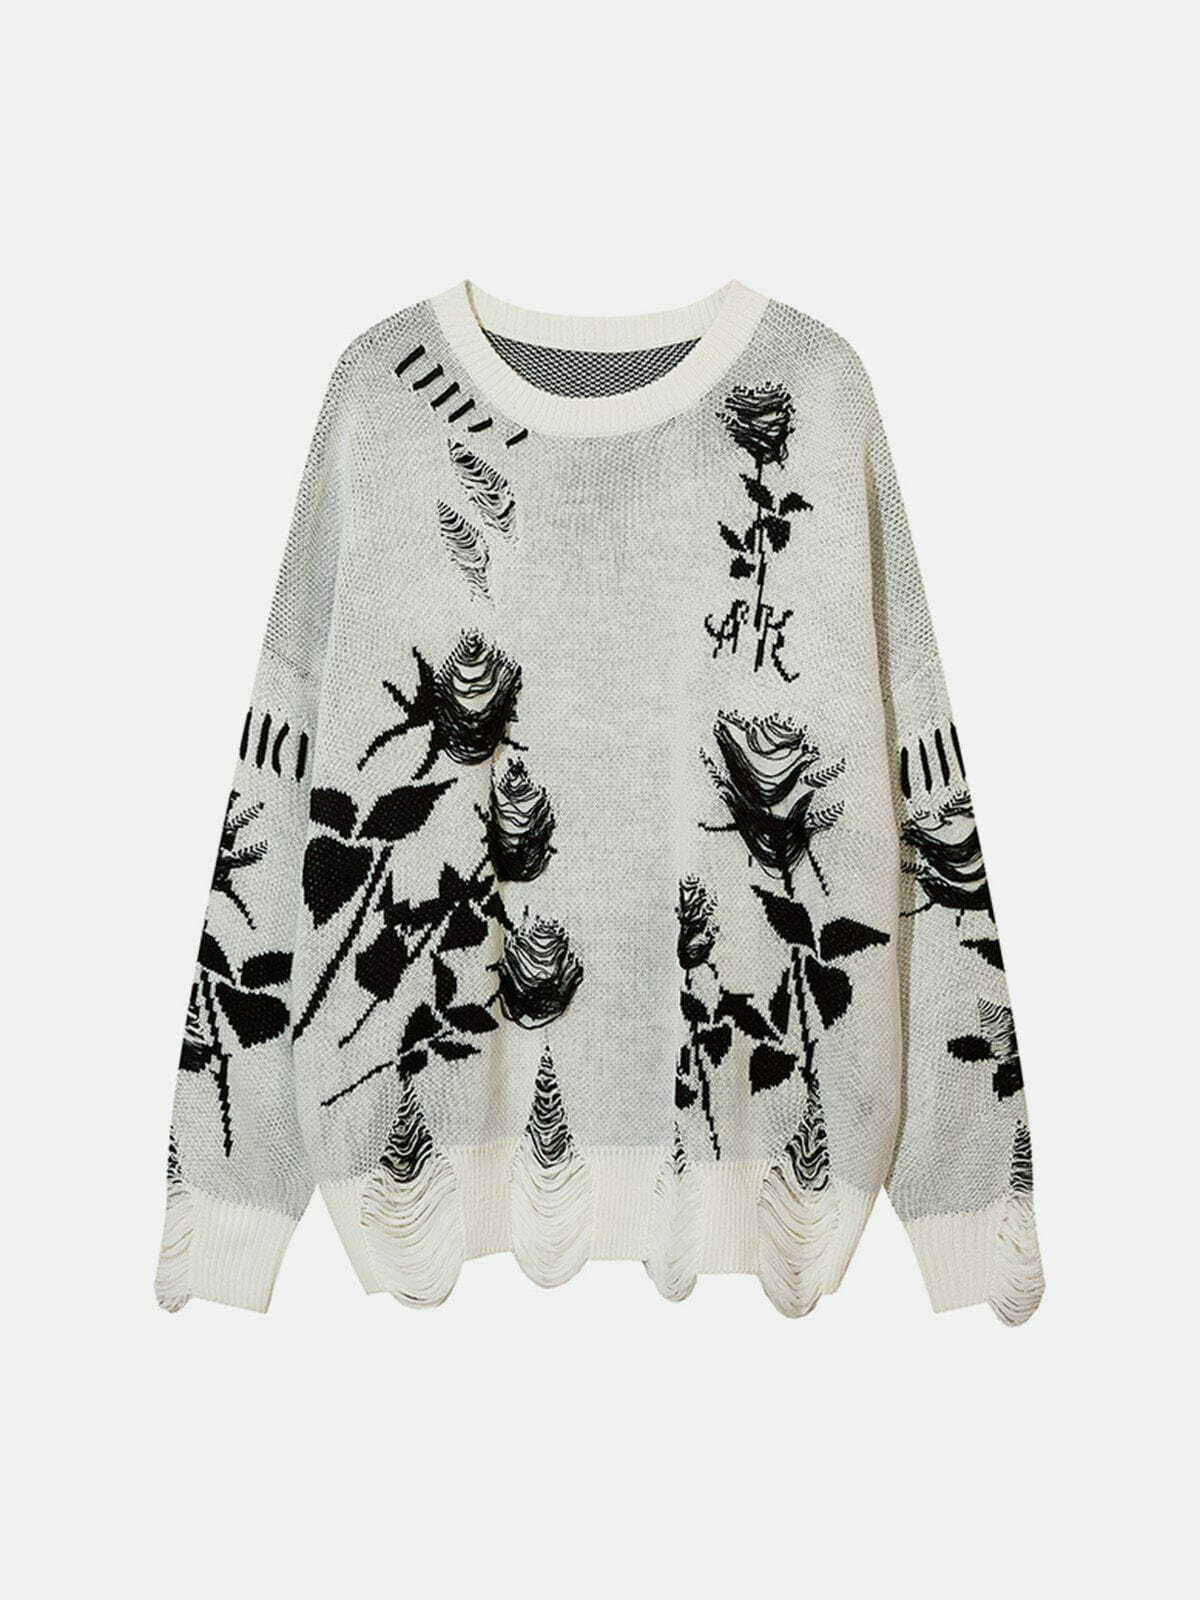 raw edge rose sweater quirky floral streetwear 6609